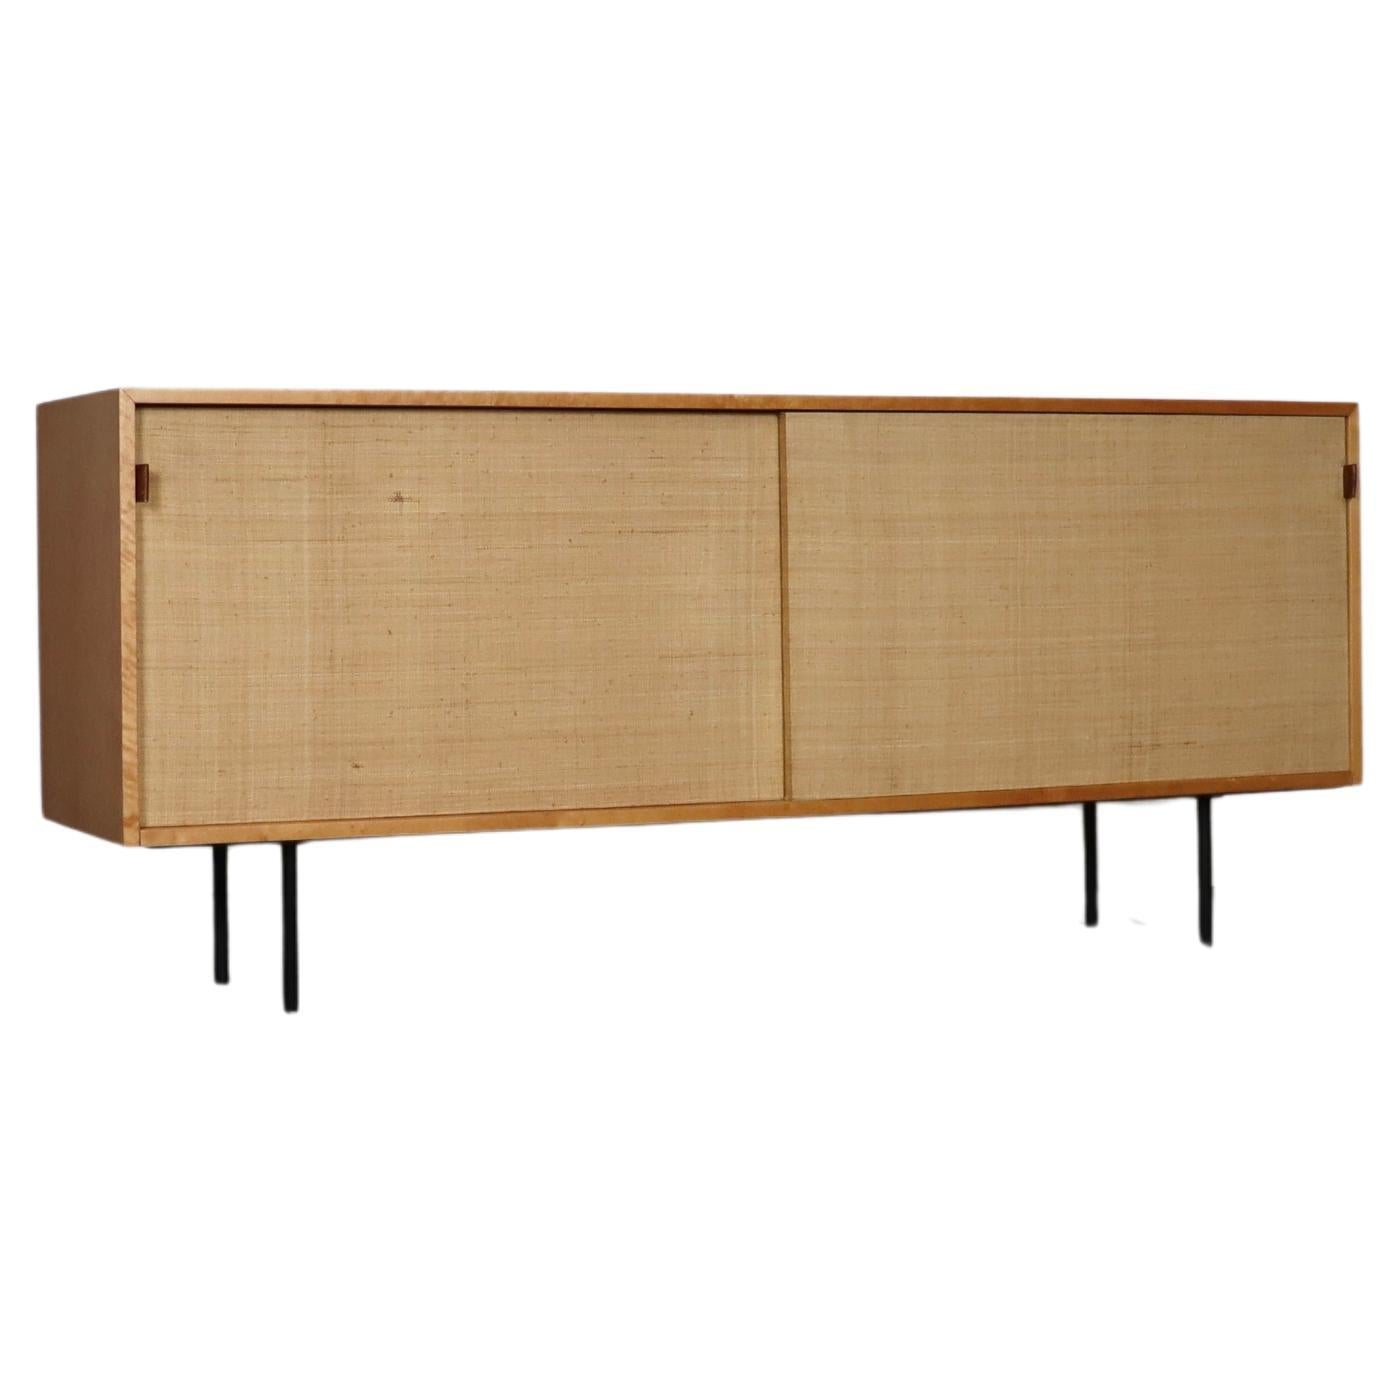 Florence Knoll Modell 116 Sideboard aus Seegras, 1950er Jahre